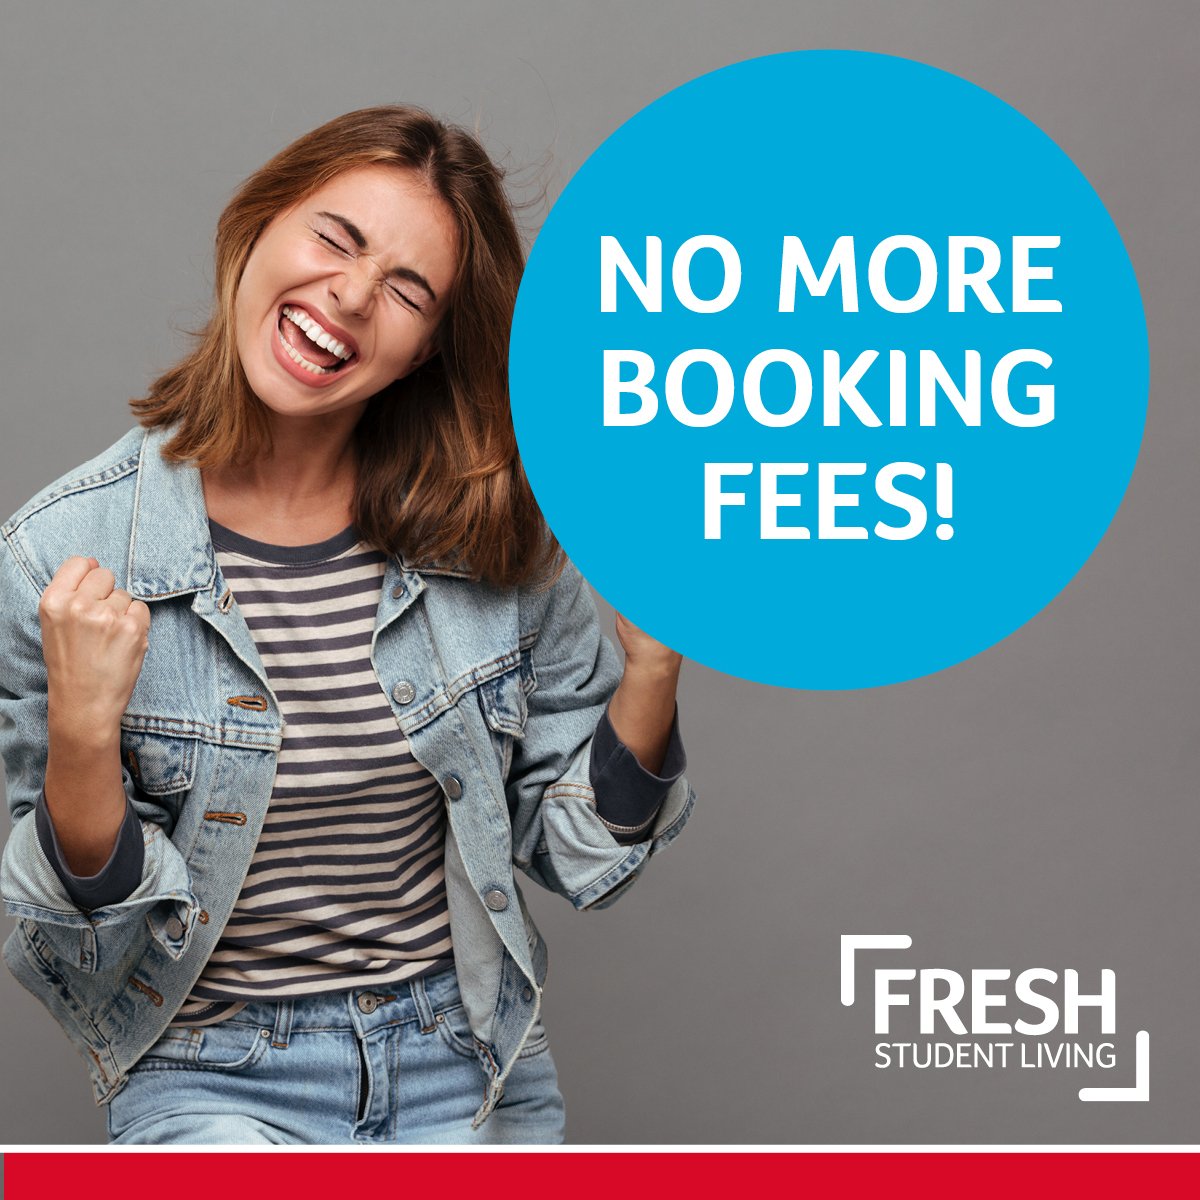 #avoiddisappointment #makethebooking #chesterstudents #chesterlife #nobookingfee